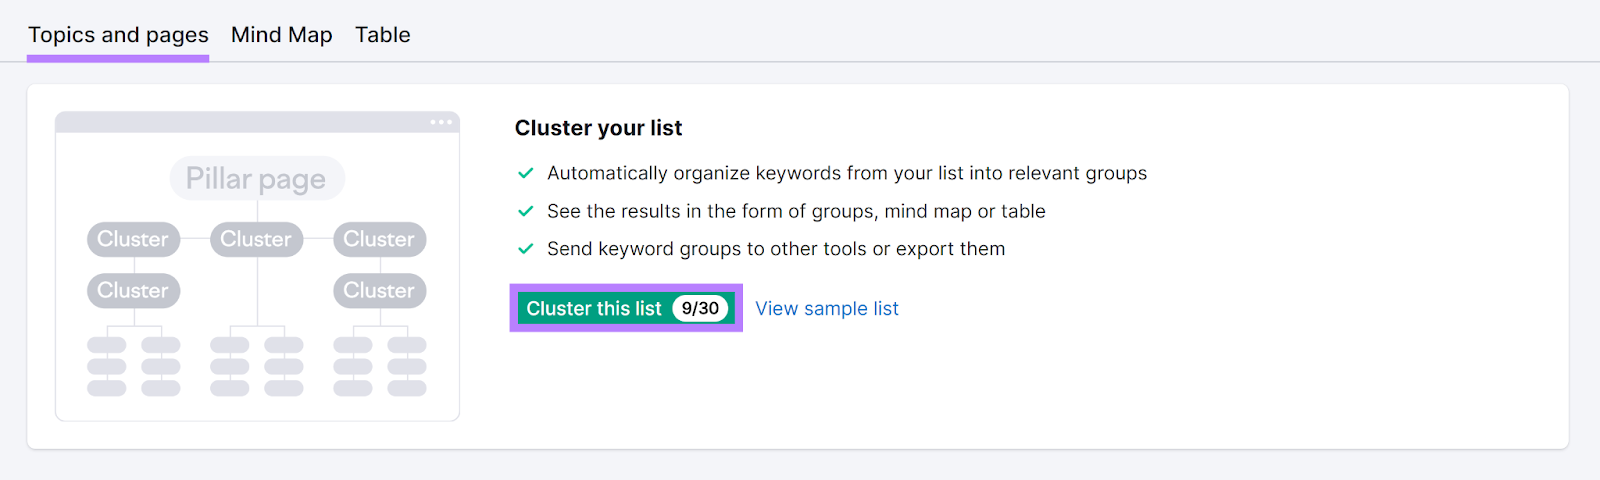 Topics and pages tab selected and Cluster this list button highlighted.